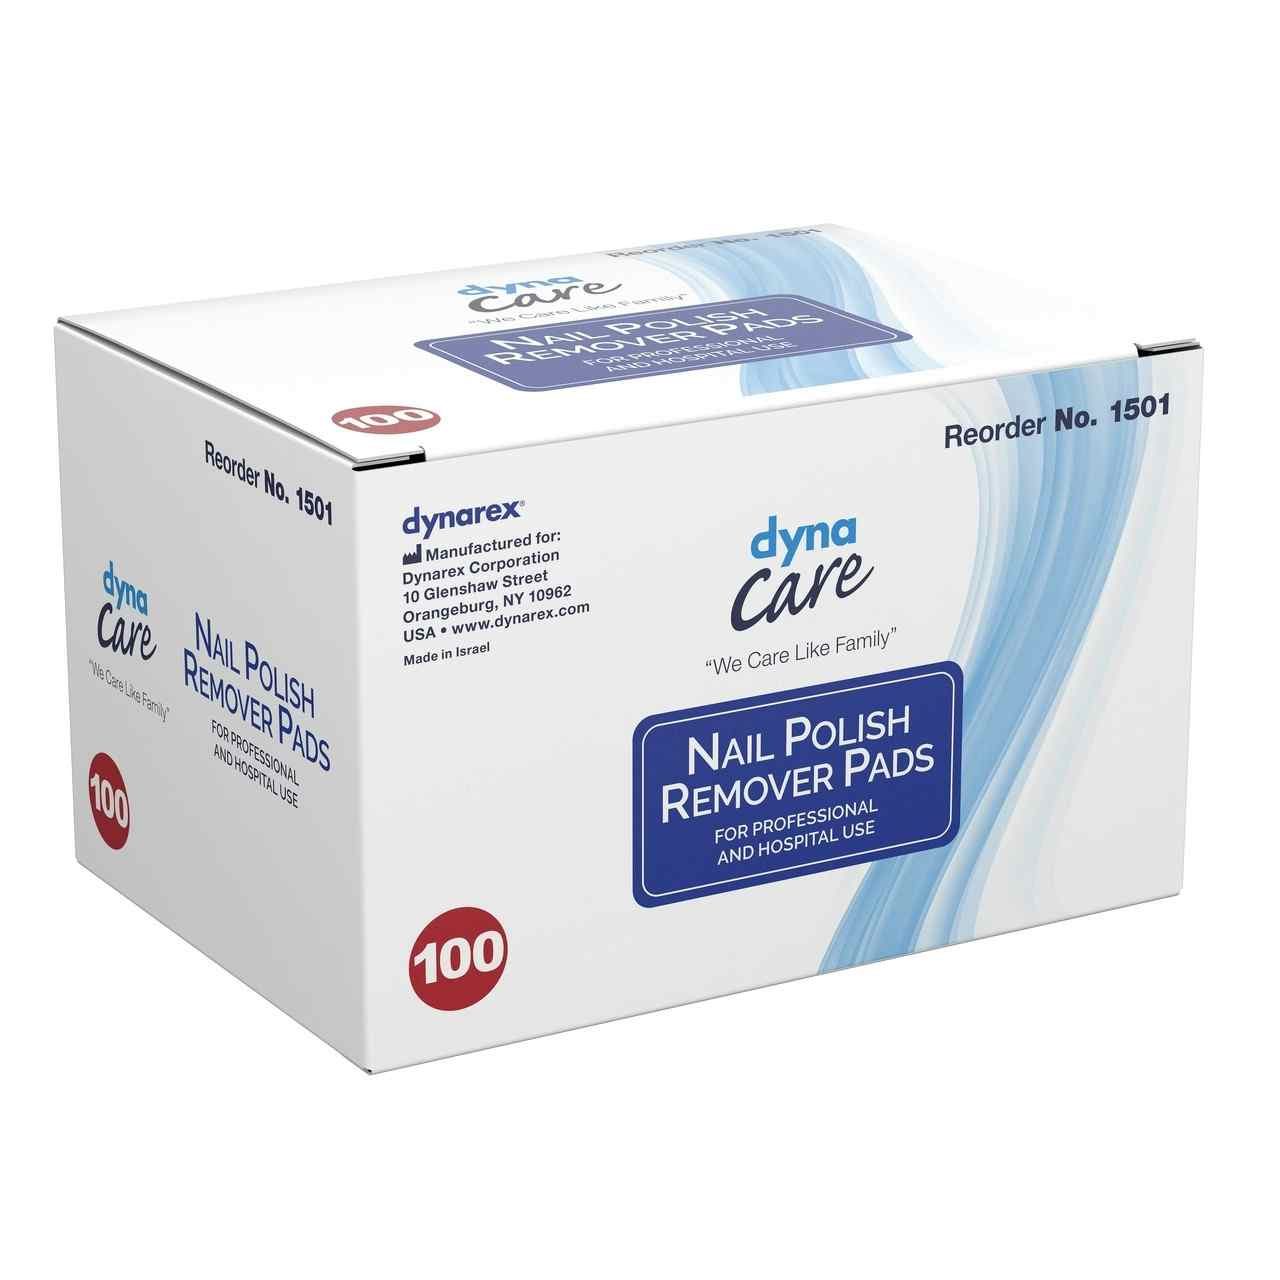 DynaCare Nail Polish Remover Pads